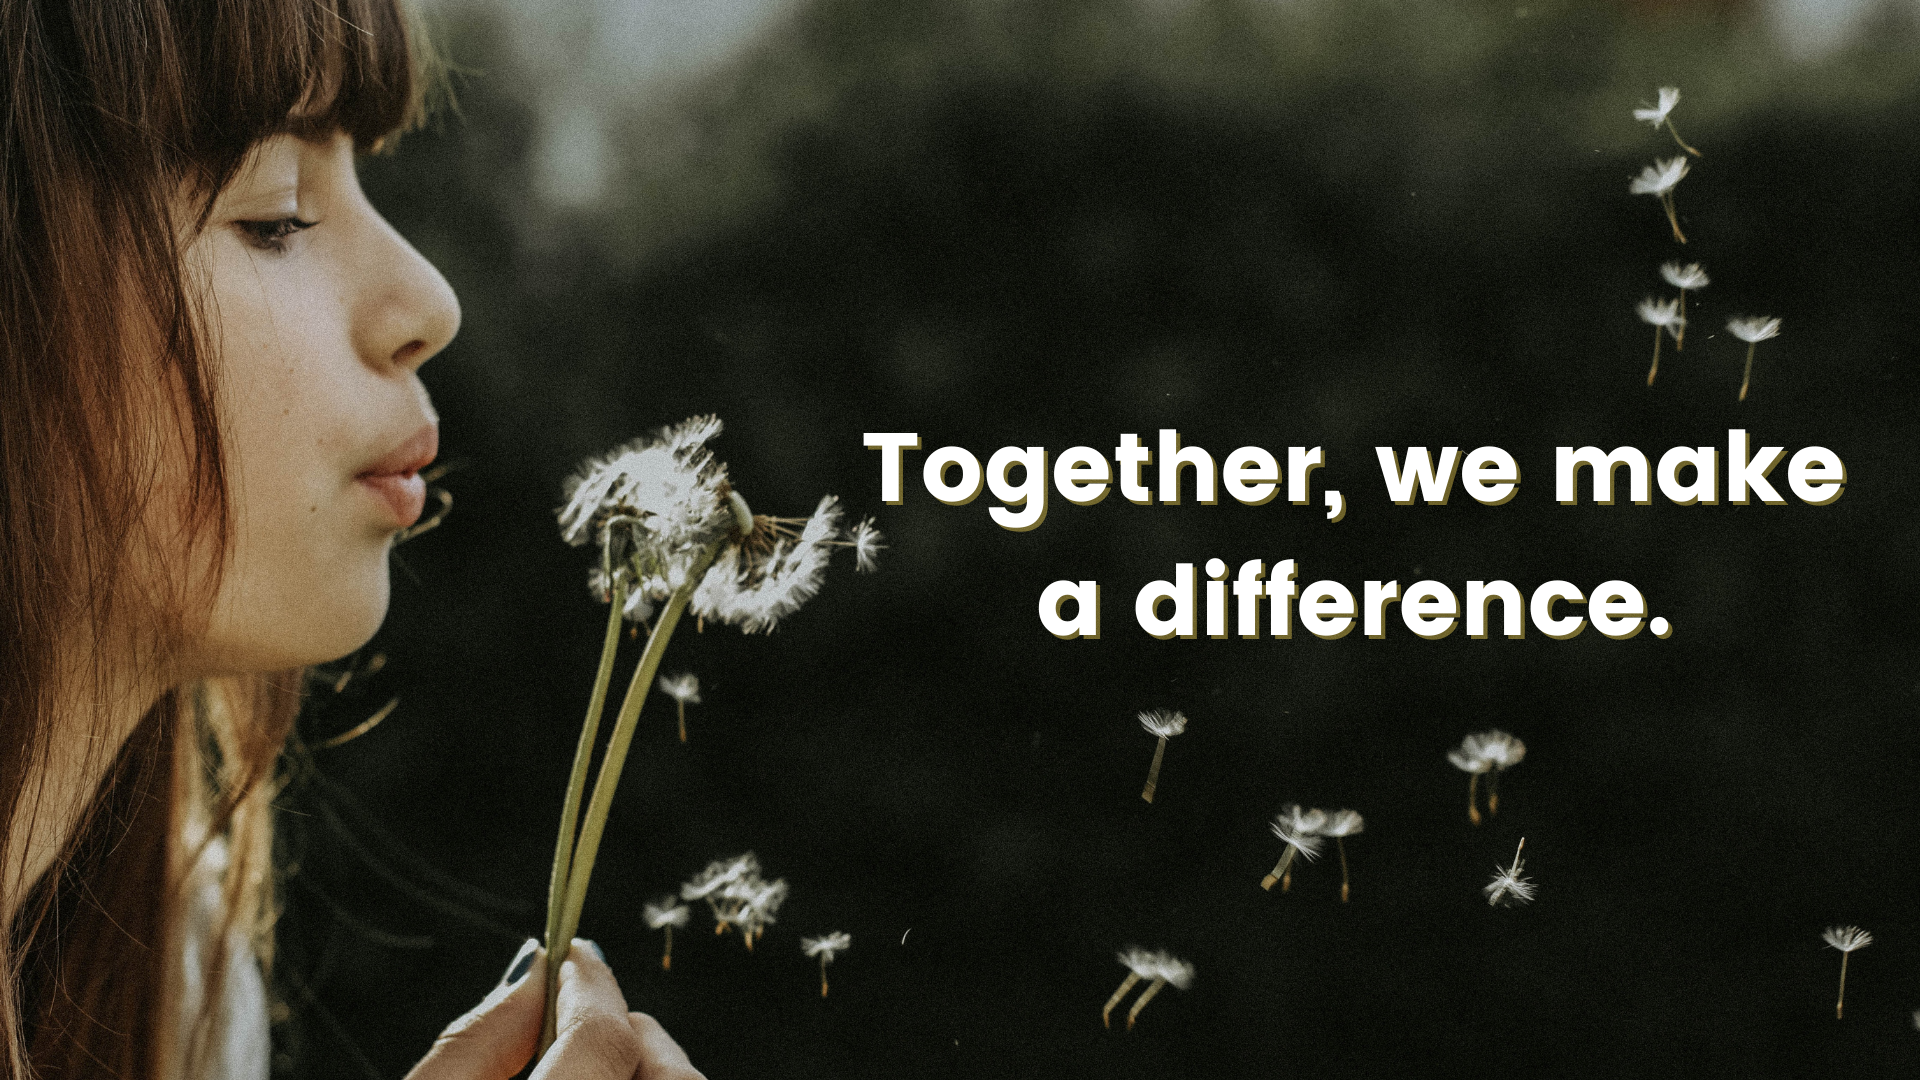 A girl blowing on a dandelion; the text reads: "Together, we make a difference."